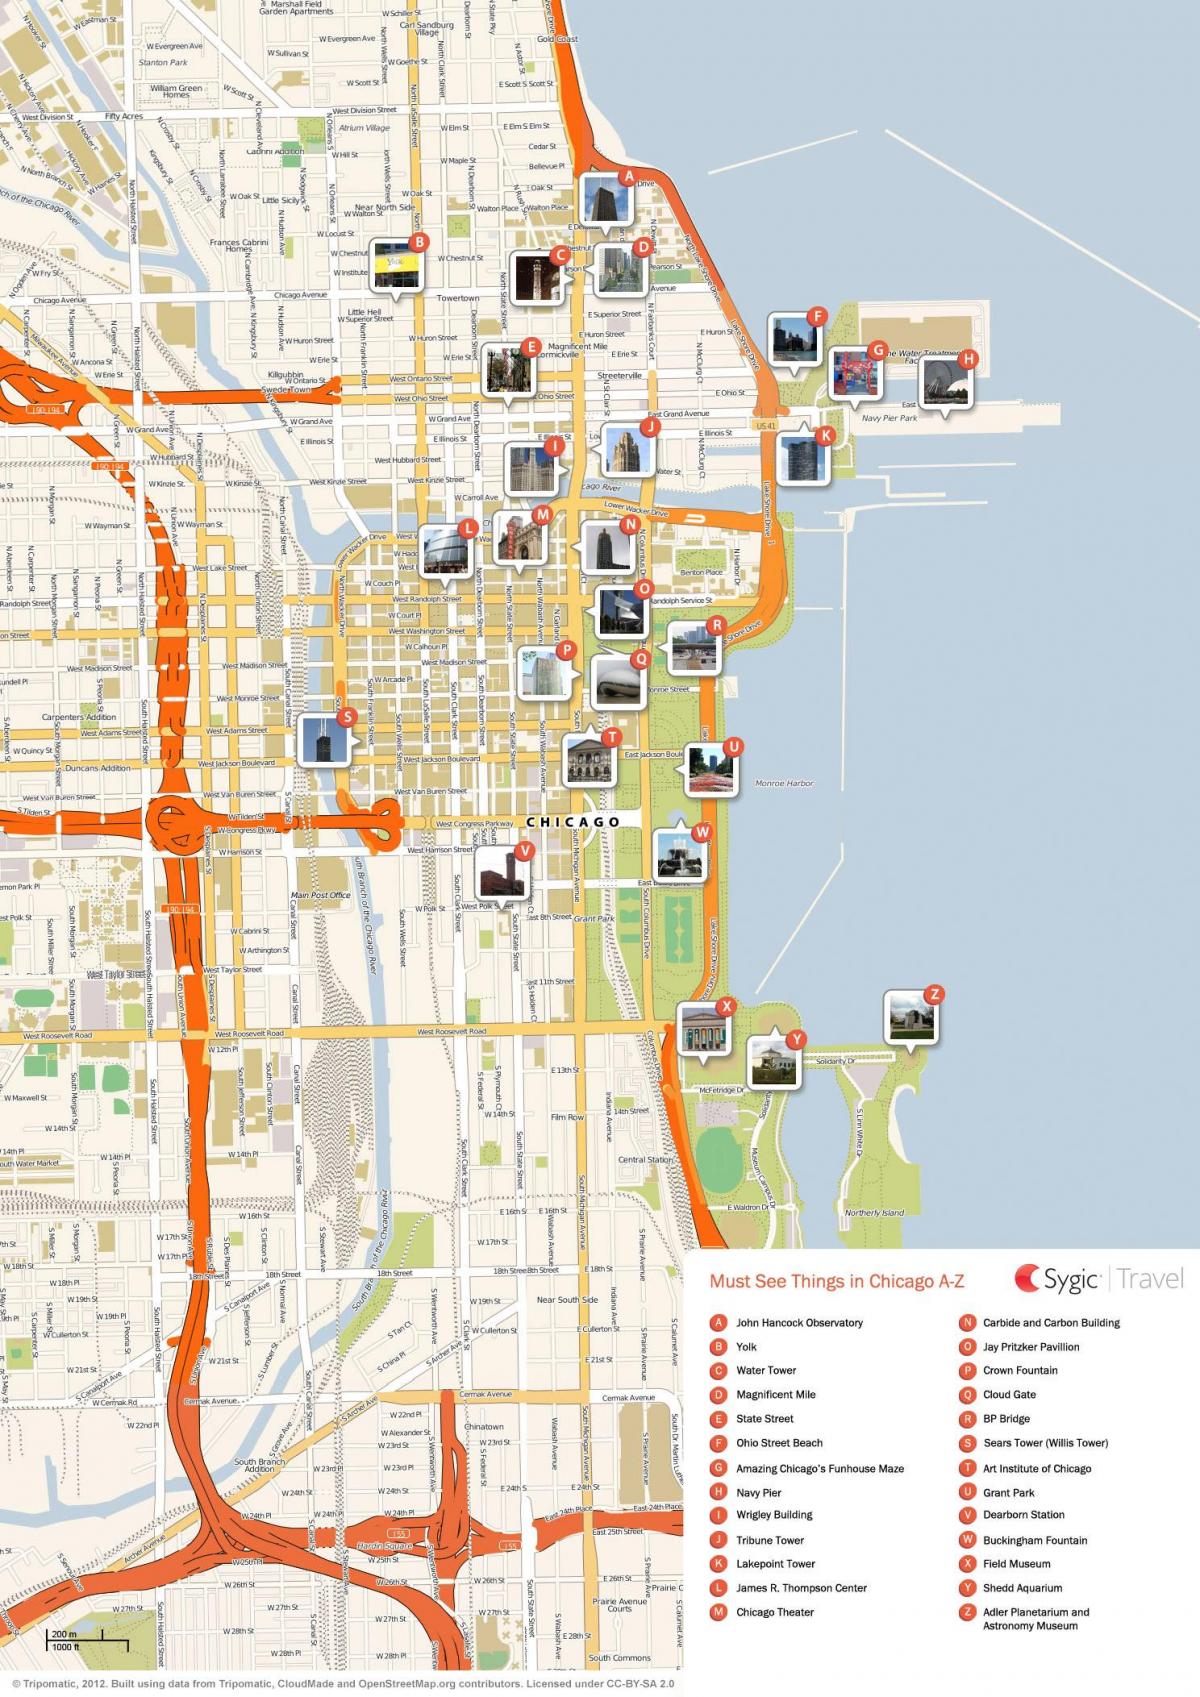 Chicago sightseeing map